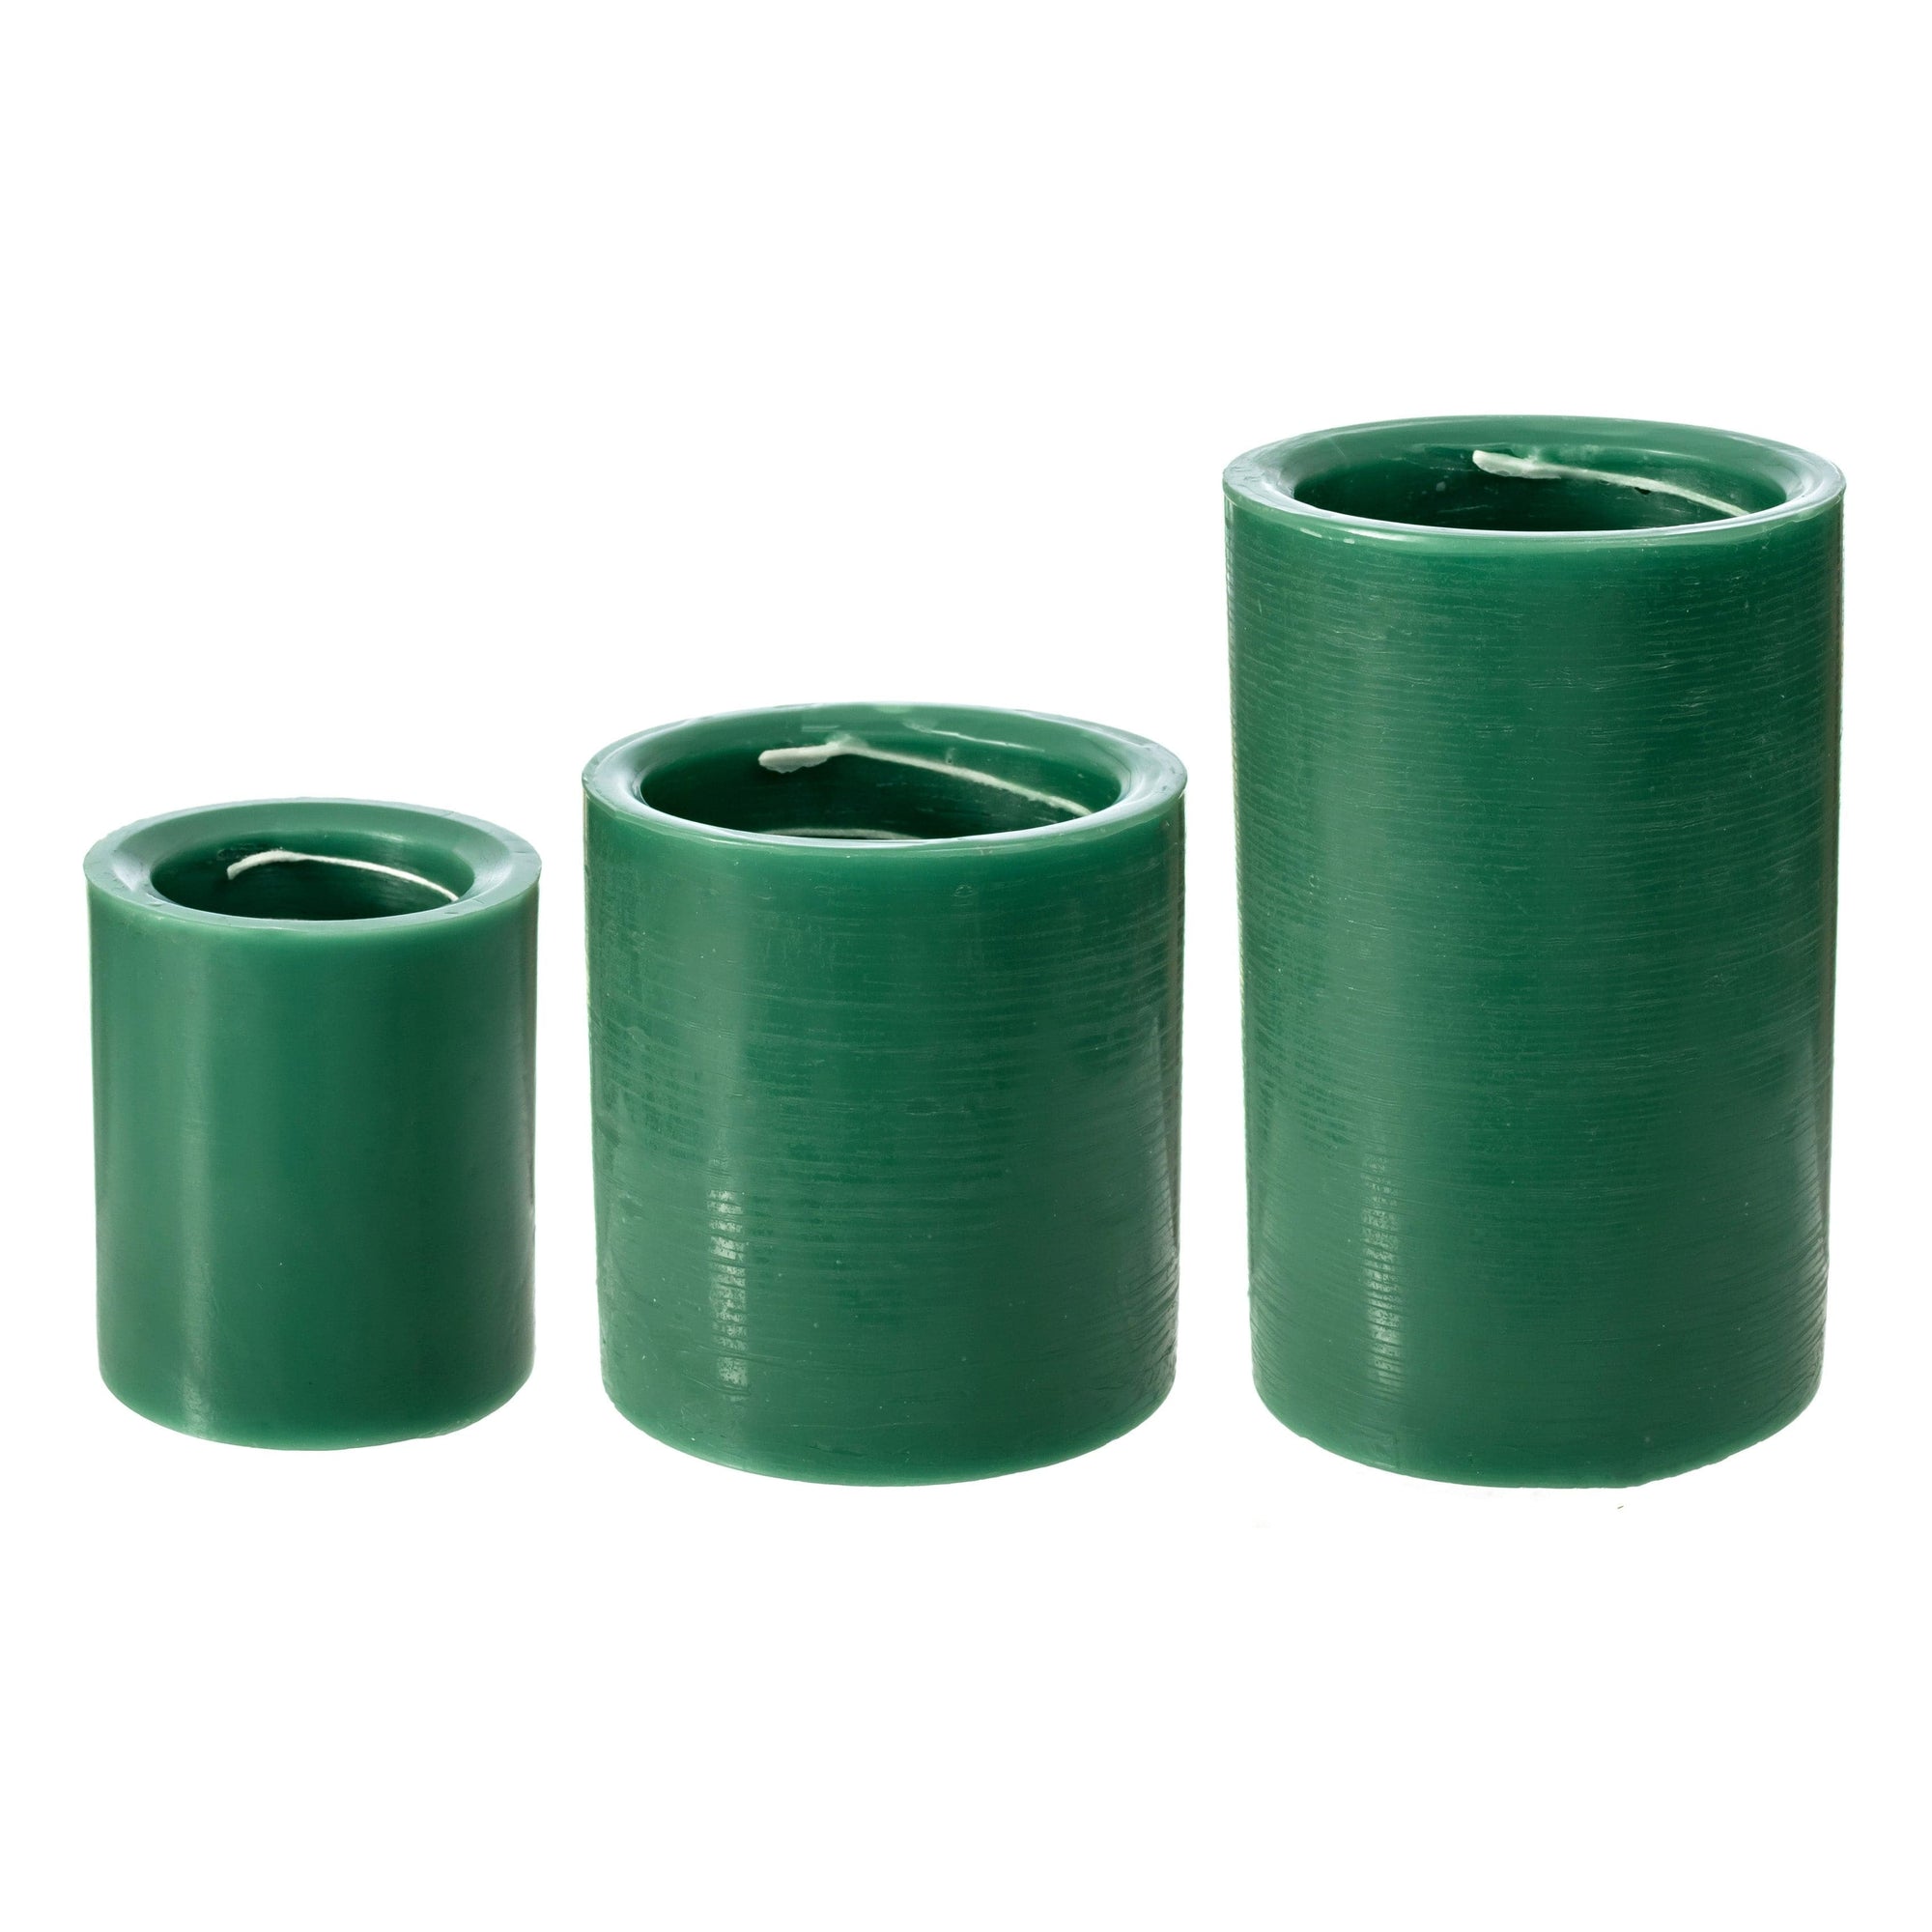 Trio of Spiral Light Candle EVERGREEN